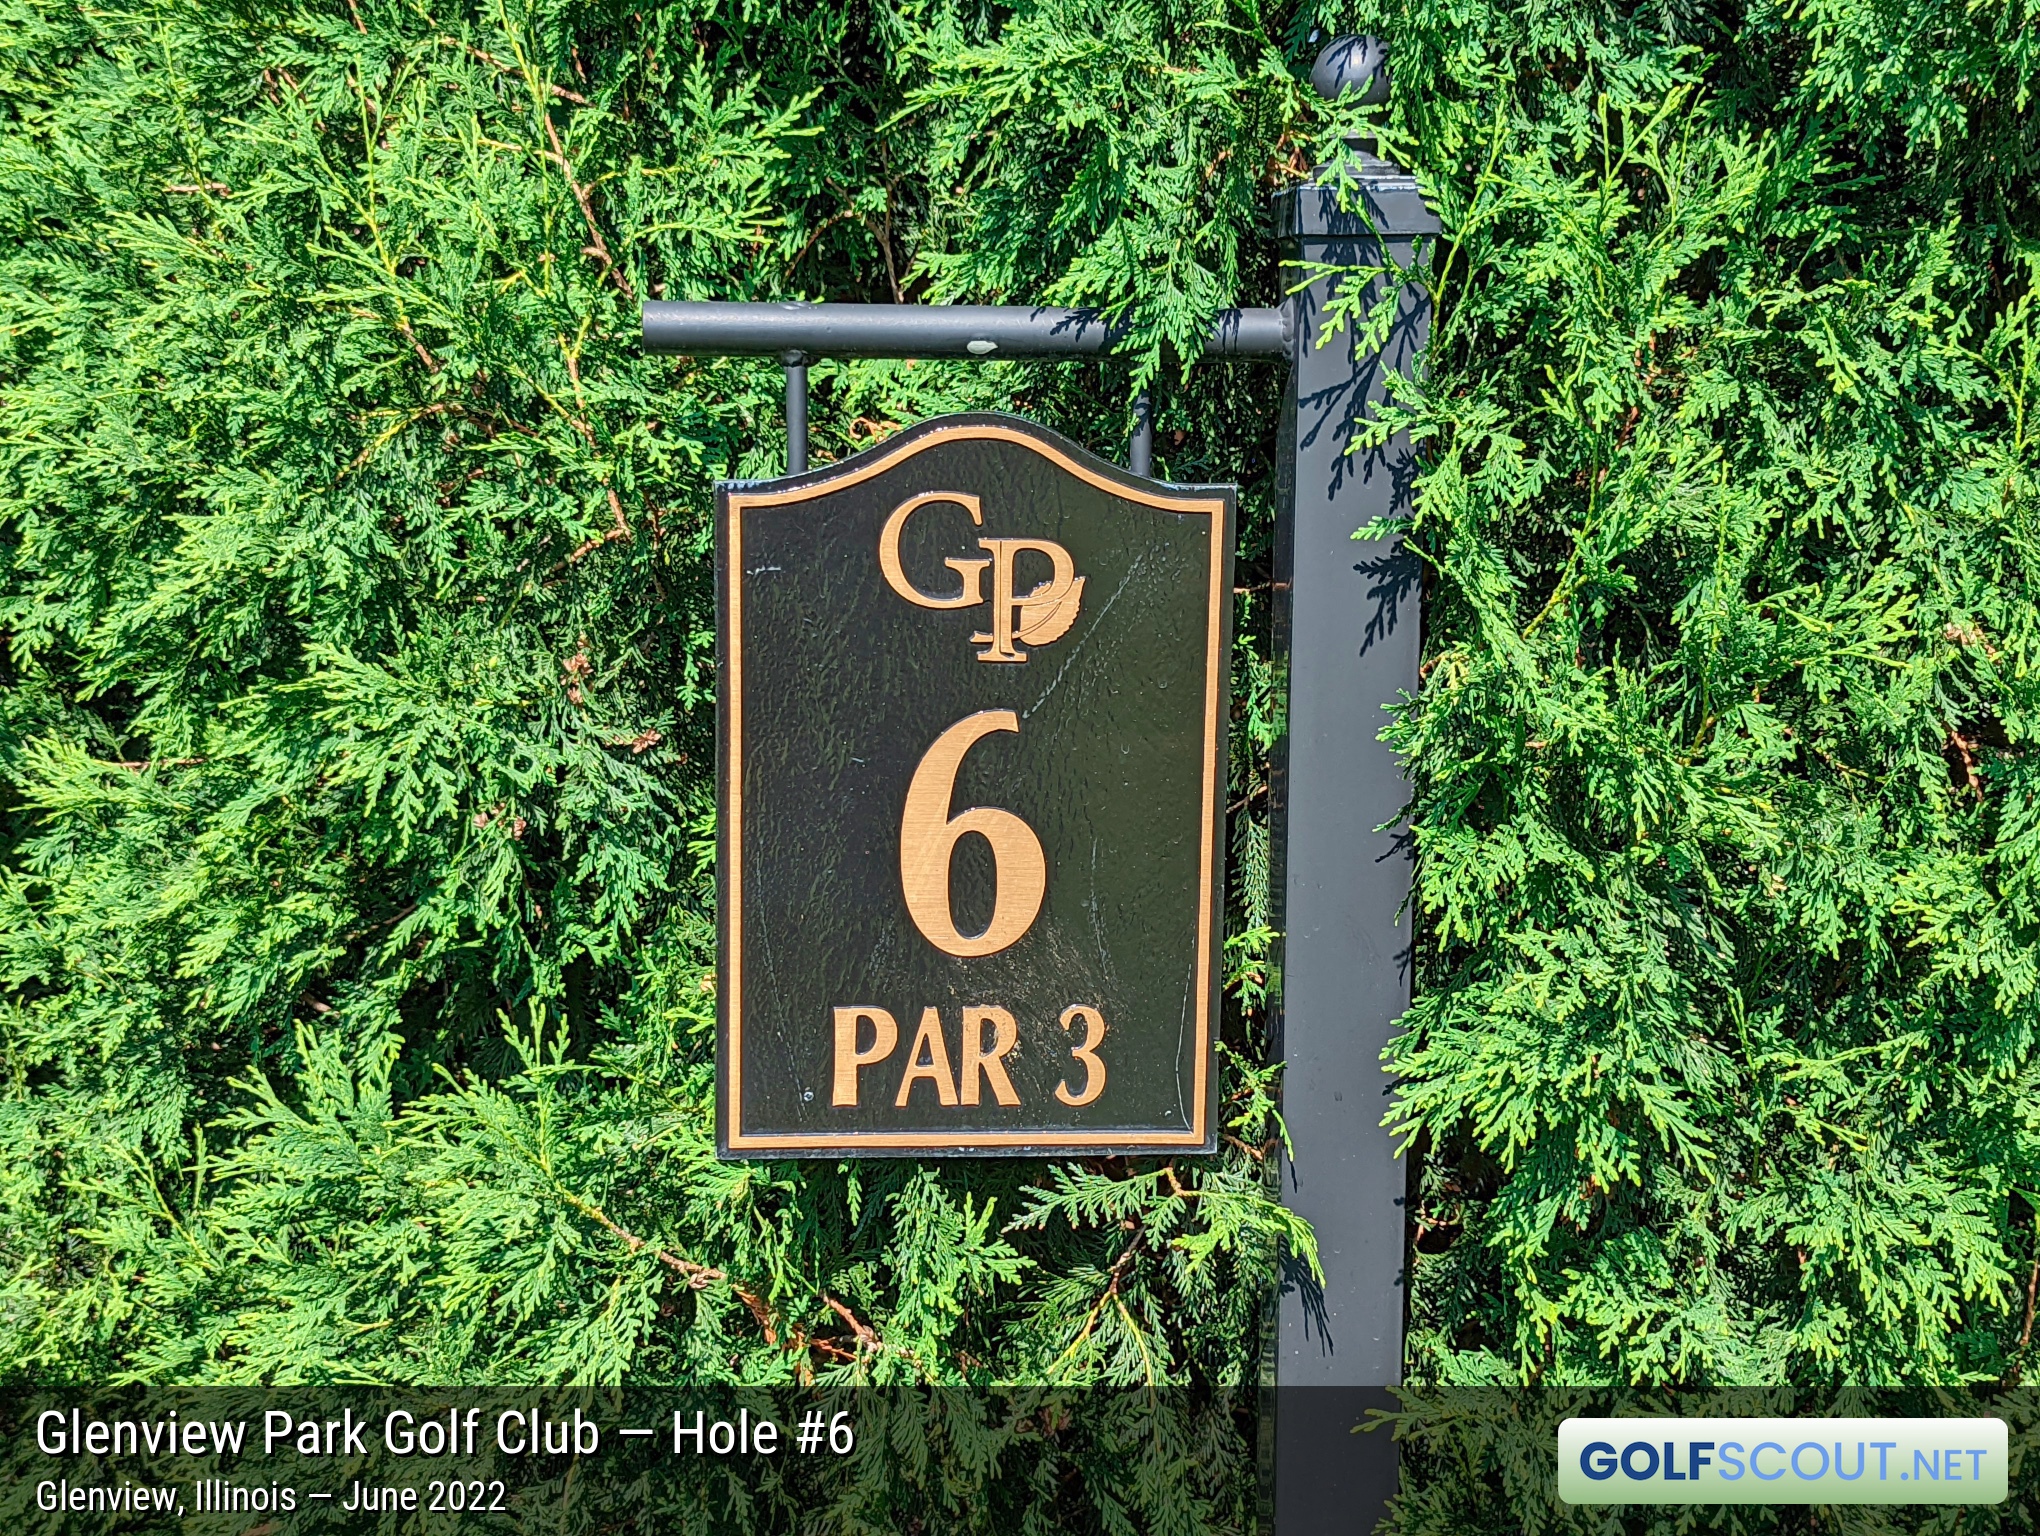 Photo of hole #6 at Glenview Park Golf Club in Glenview, Illinois. 